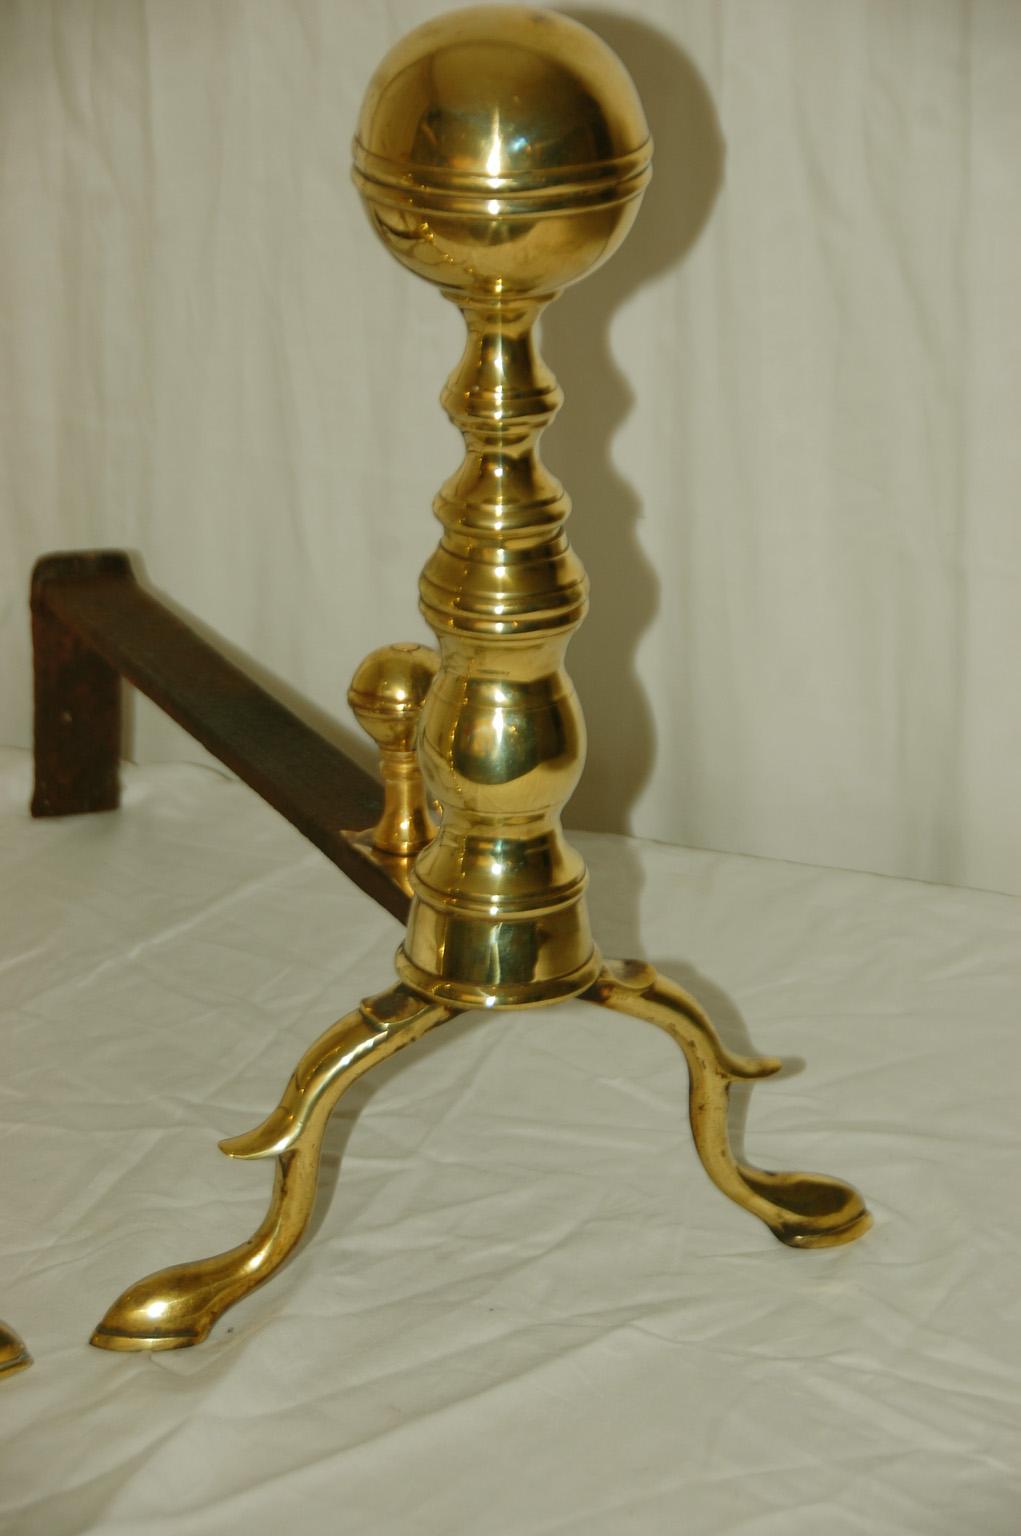 American Federal period cast brass belted ball top pair of andirons. These 15 inch high andirons have their original belted ball log stops but they have had new bolts added to secure them (only visible when you turn the andirons upside down). They